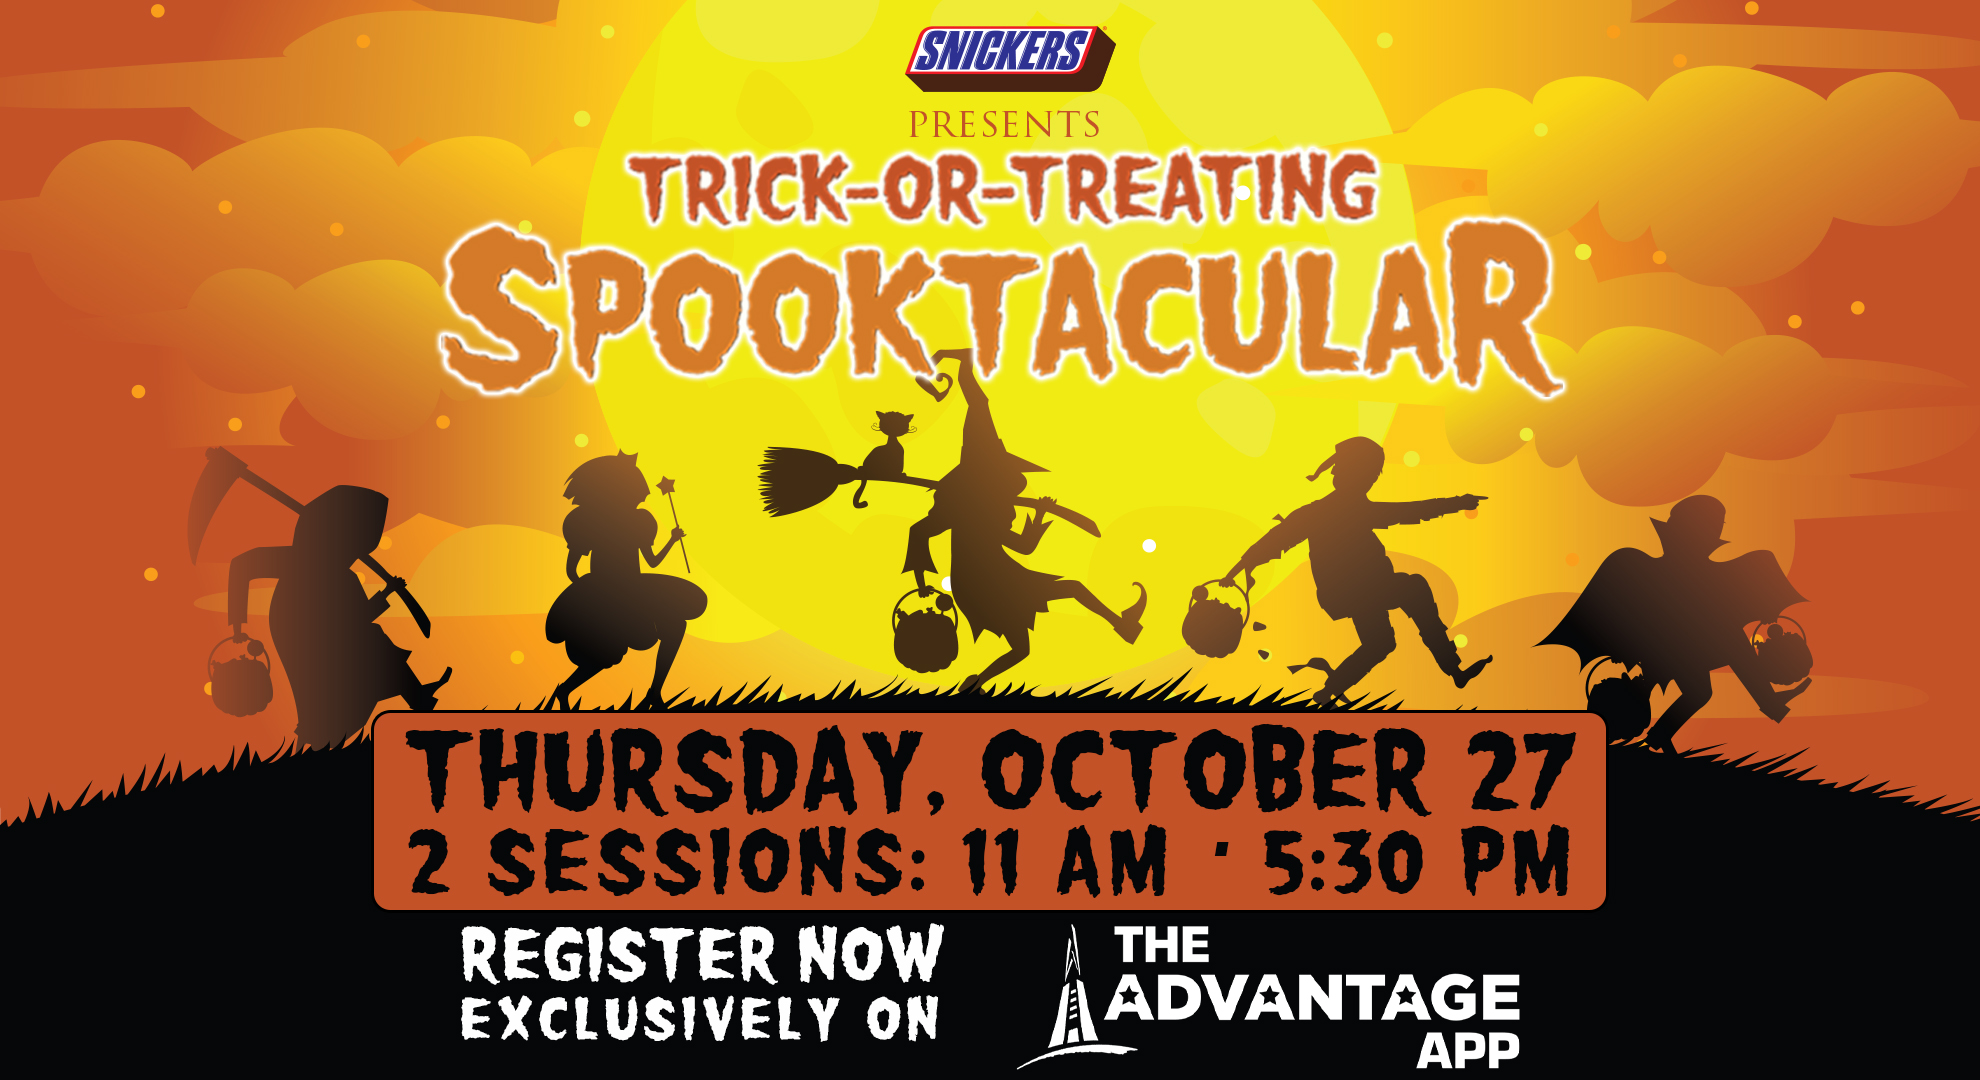 PATRIOT PLACE HOSTING TRICK-OR-TREATING SPOOKTACULAR THURSDAY, OCT. 27